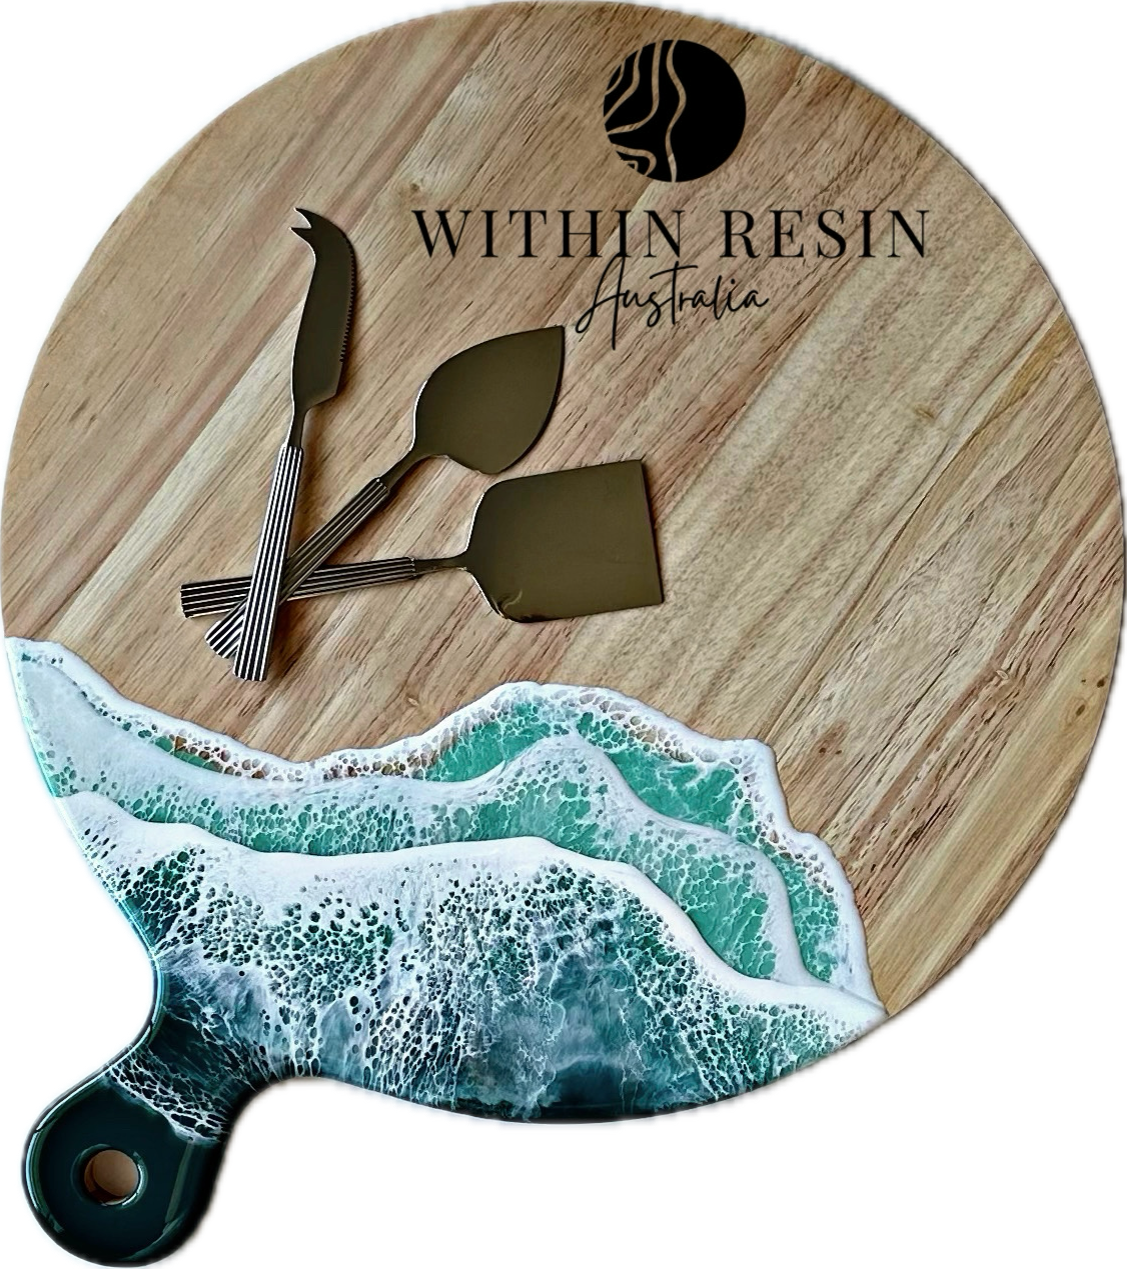 Turquoise Ocean Charcuterie Board with handle